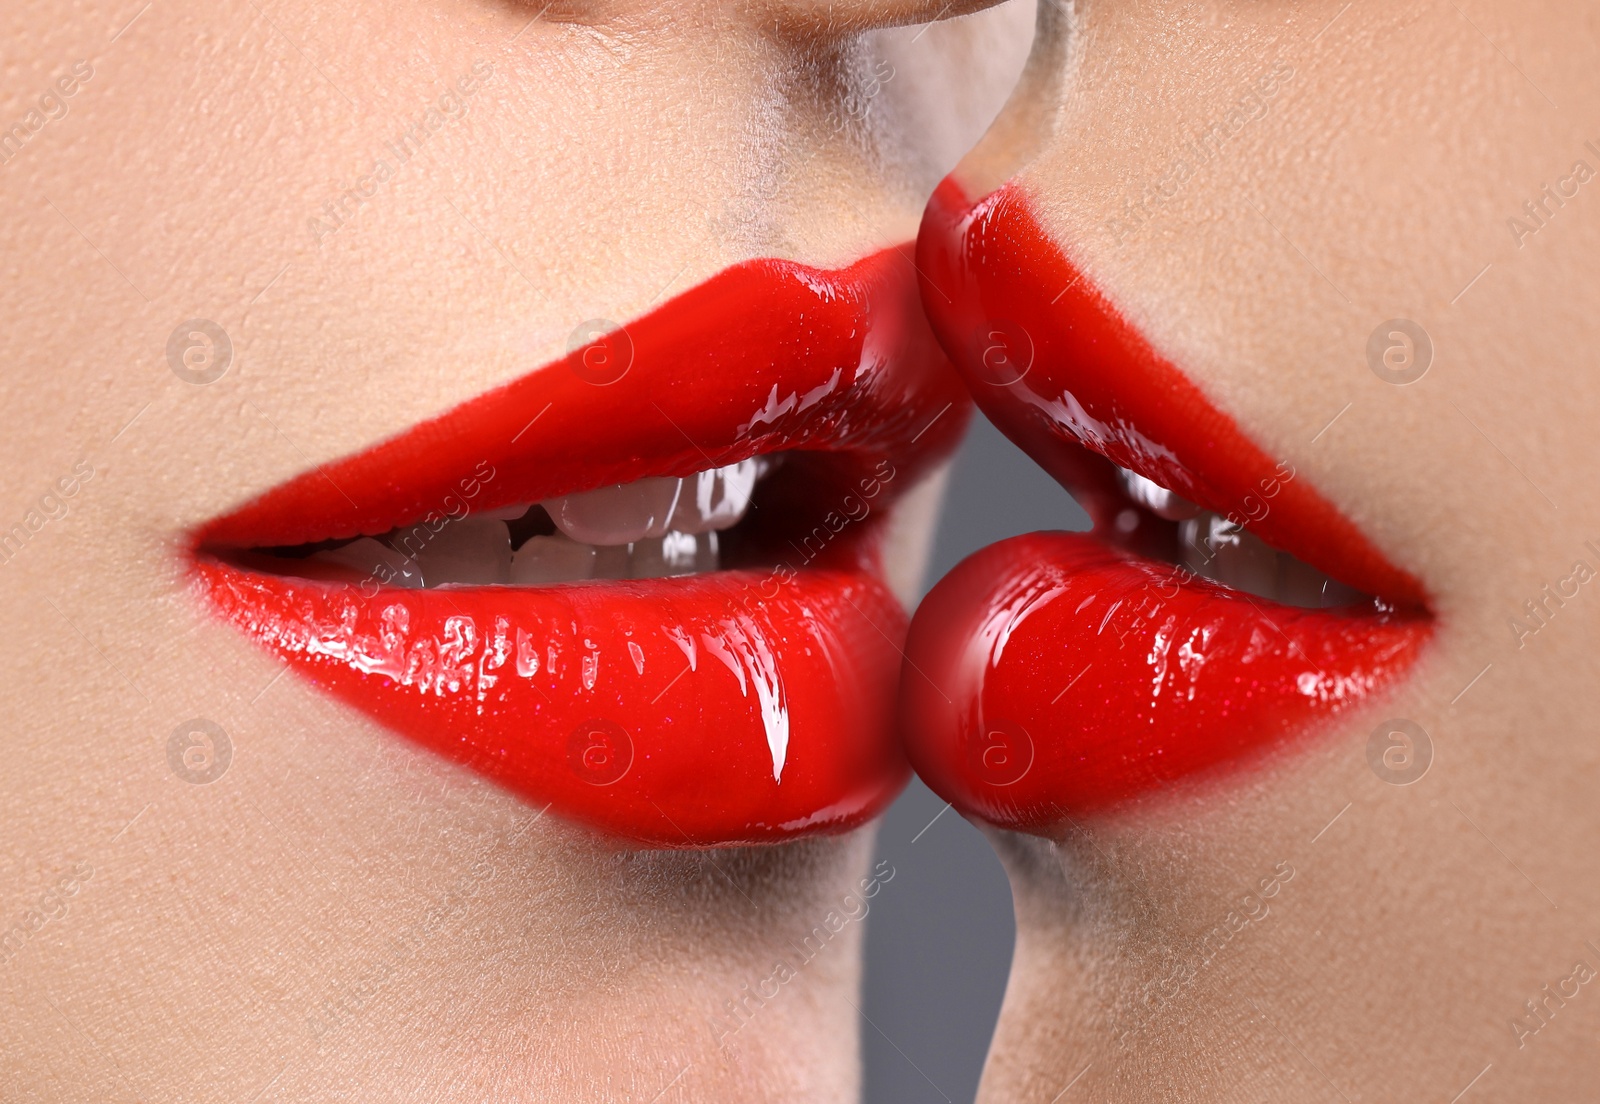 Image of Closeup view of girls kissing each other. Lesbian couple